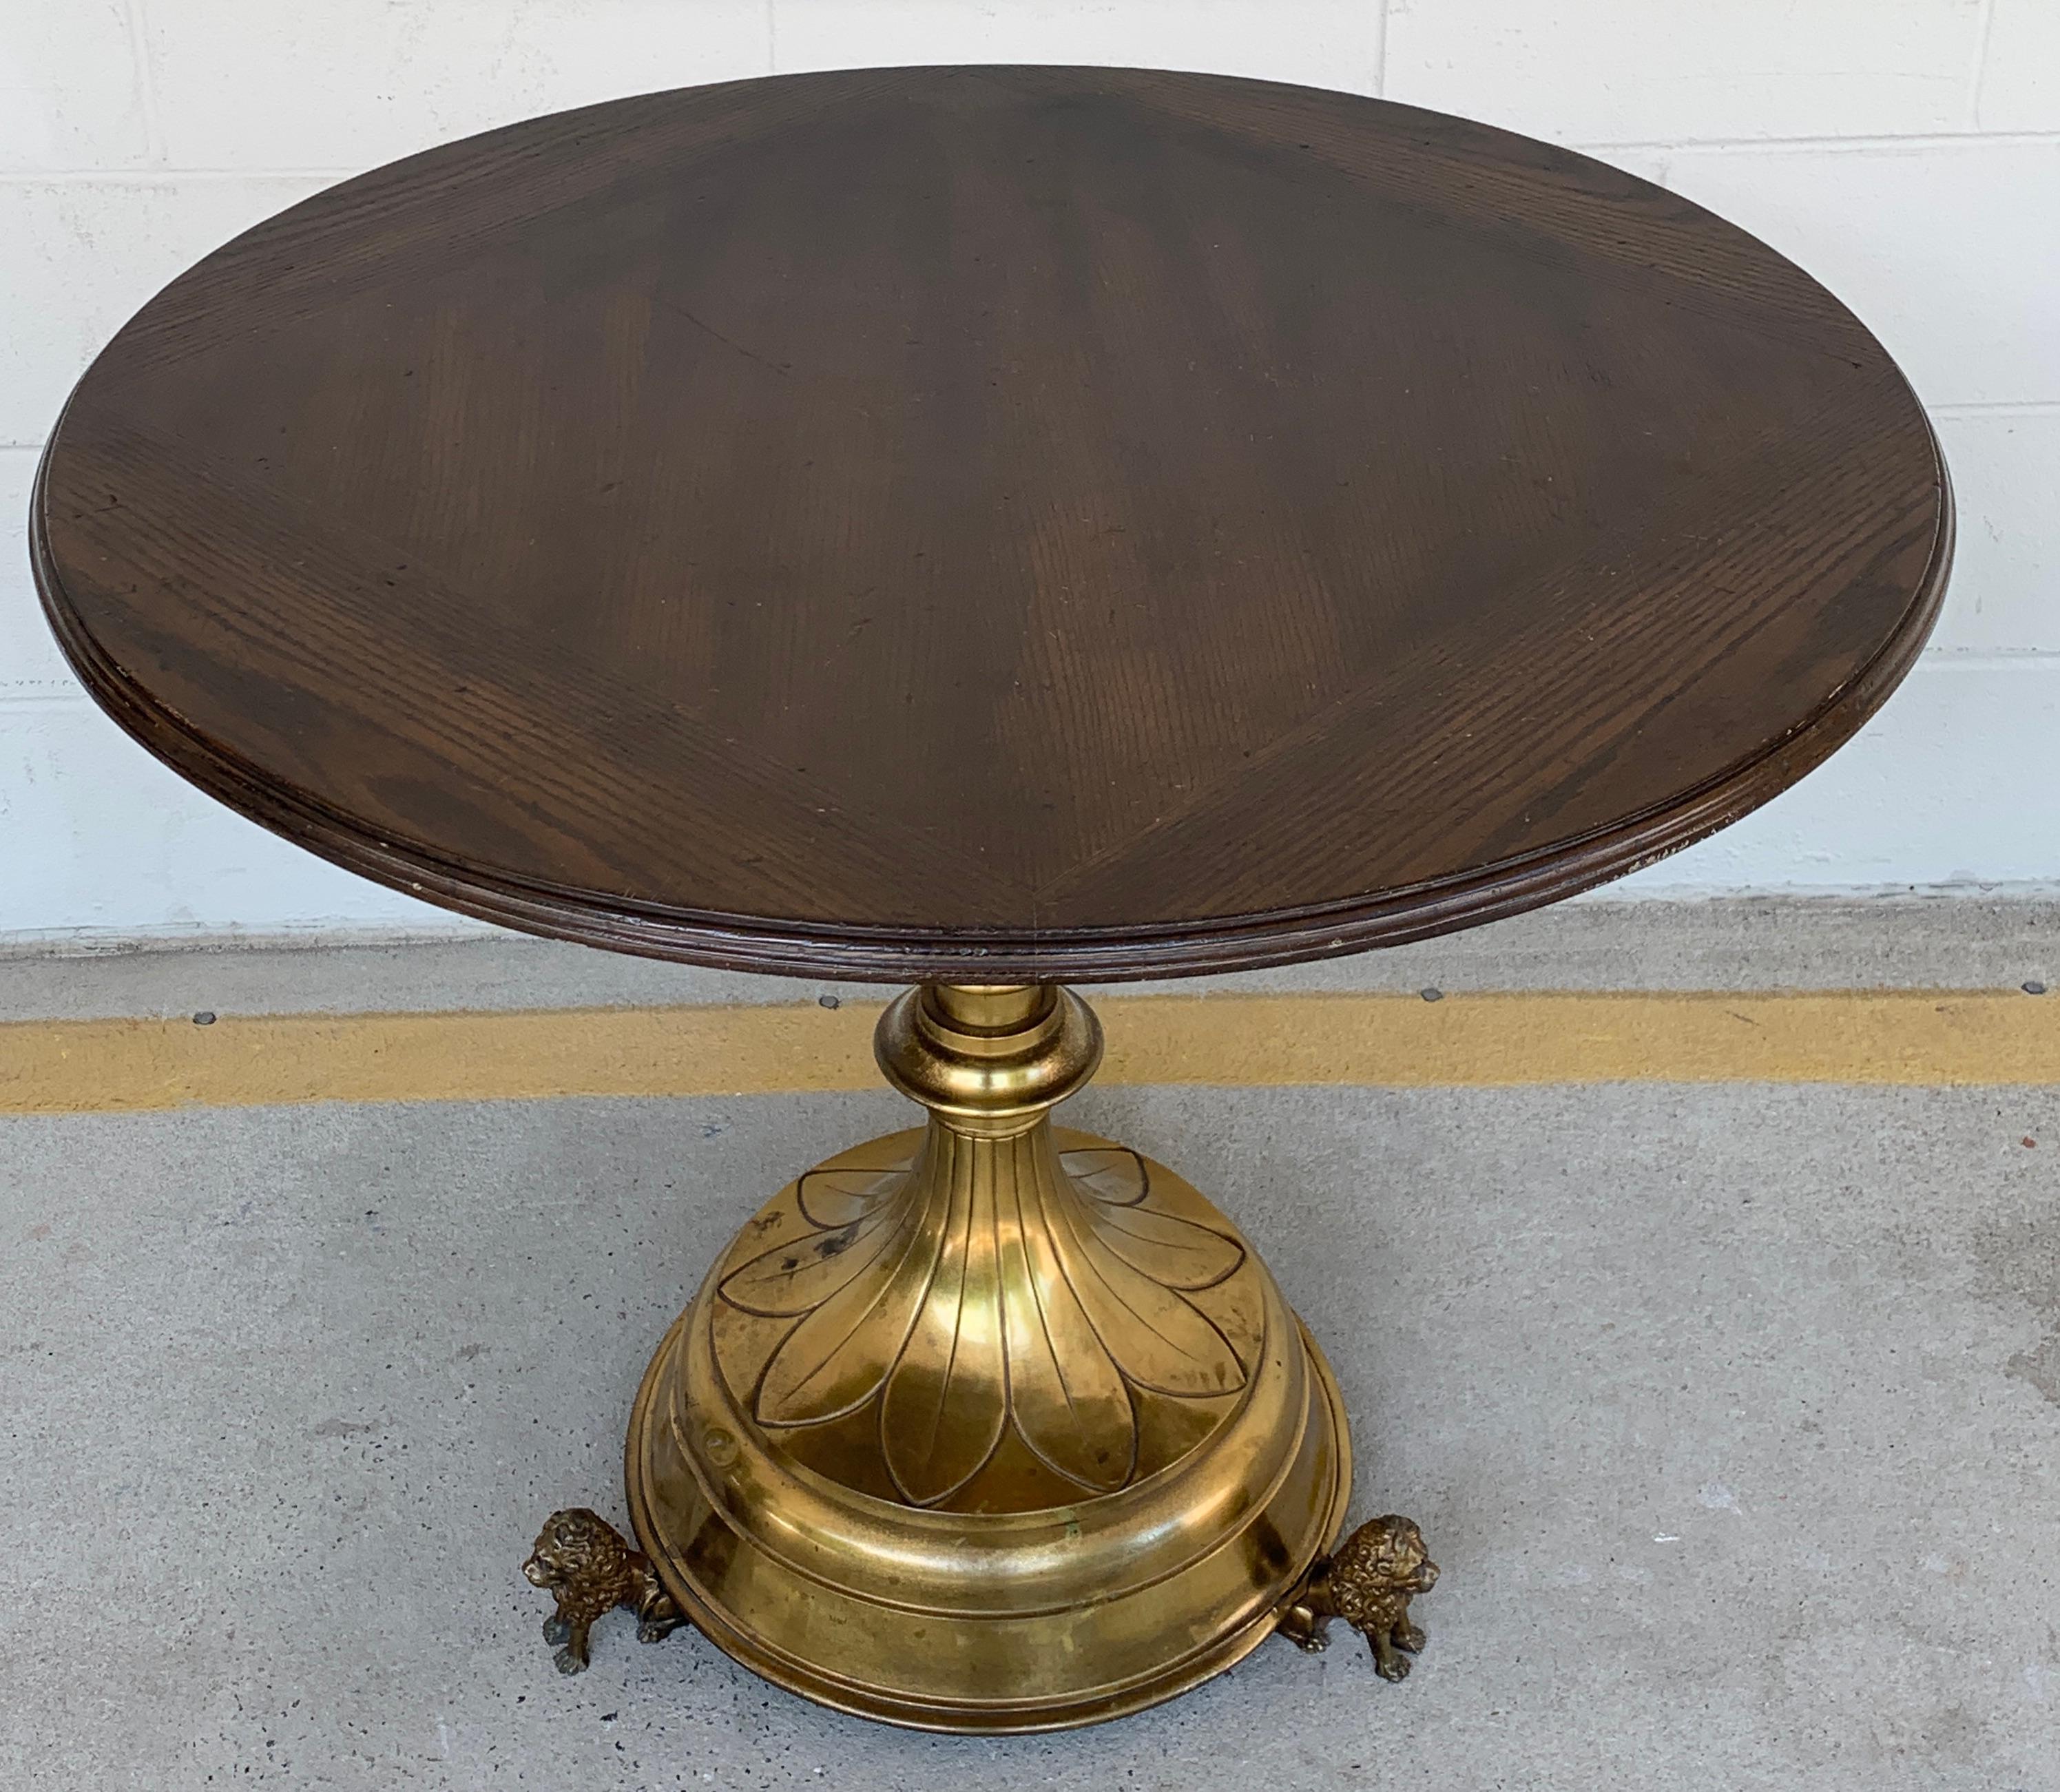 Antique English brass and mahogany lion motif pub table, with circular 35.5